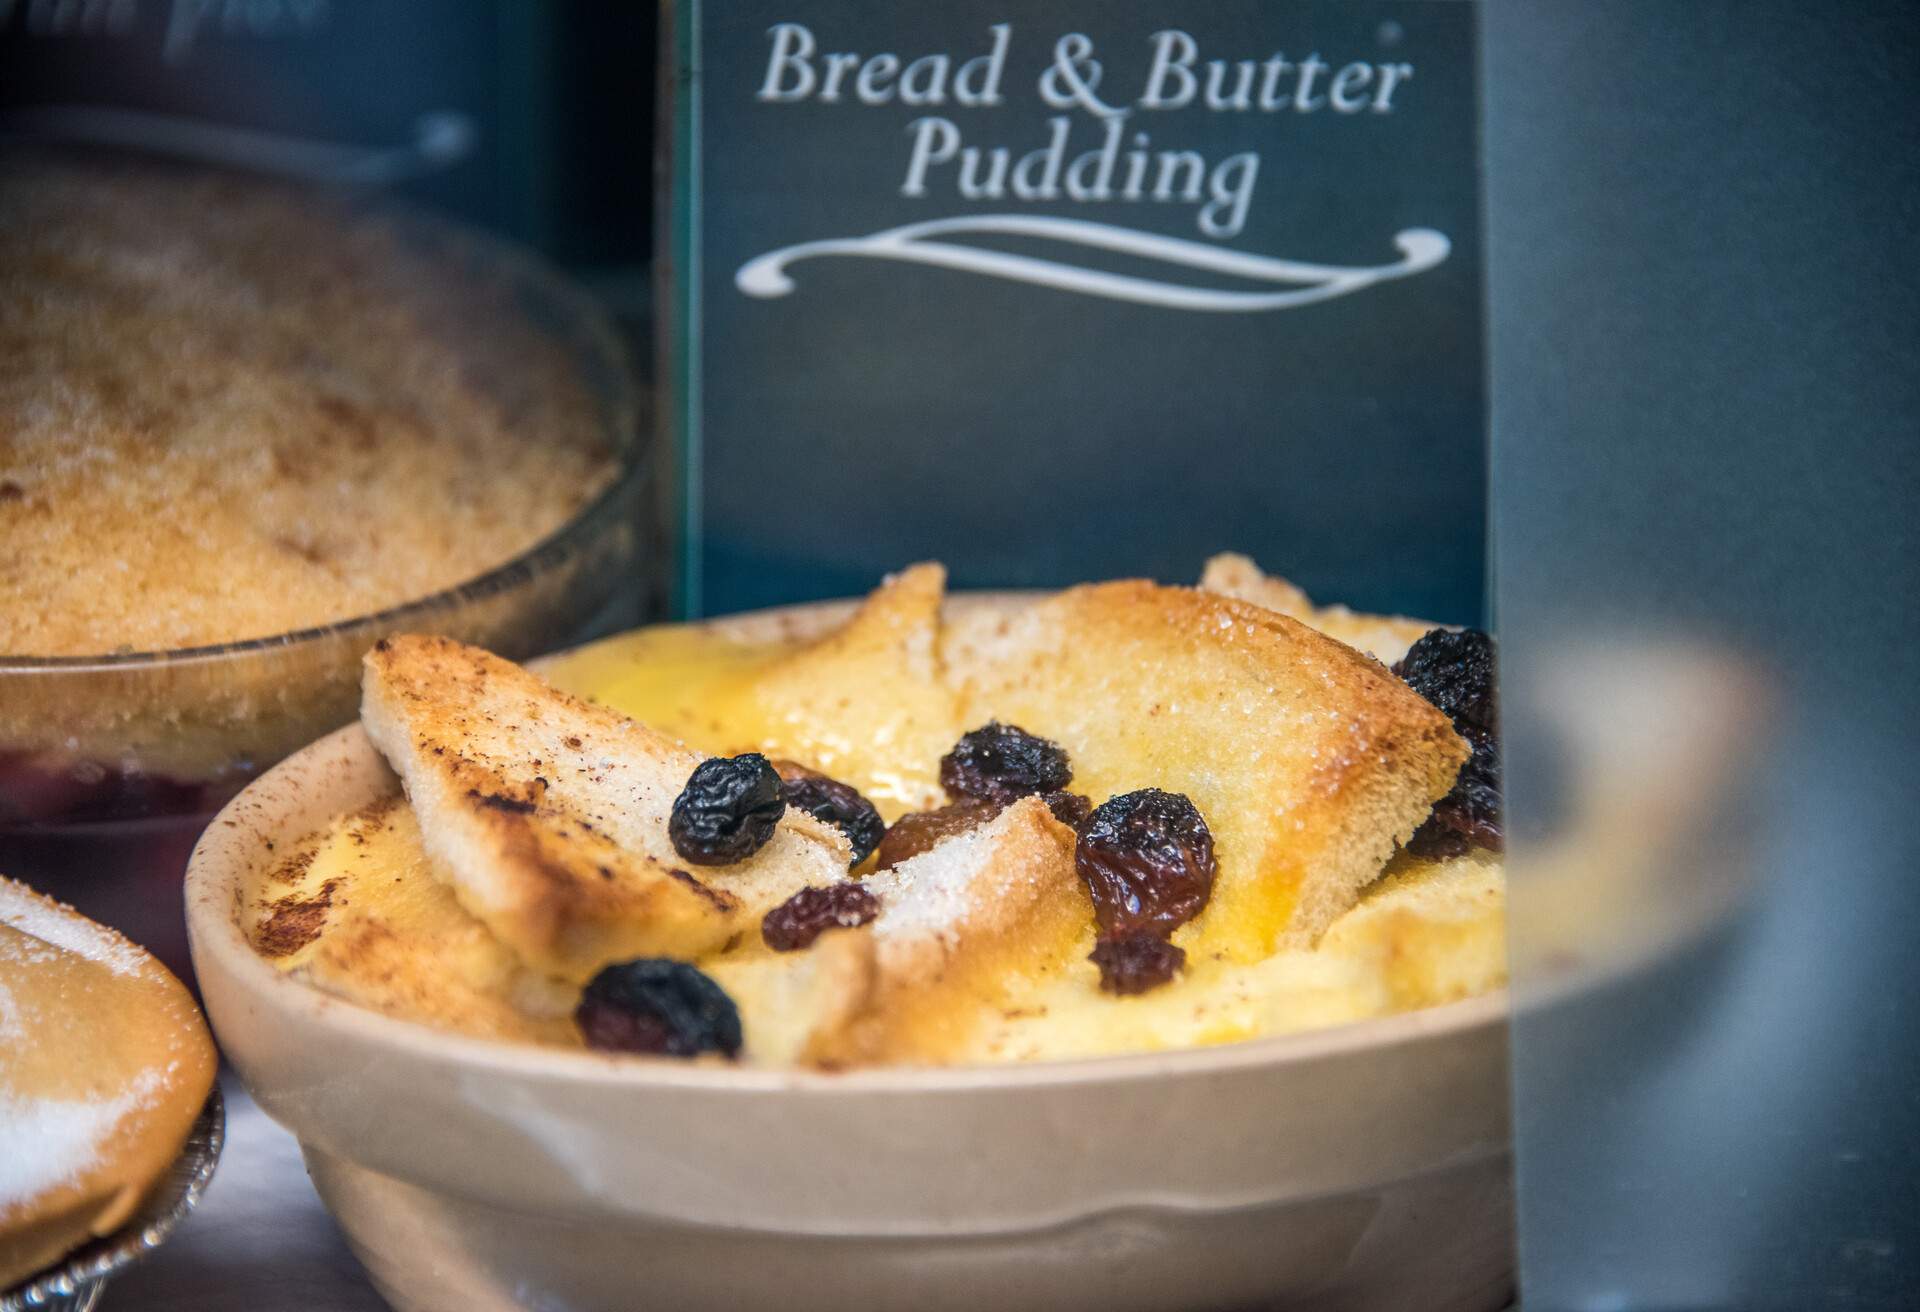 Close up of a Bread & Butter Pudding on display with name tag in a traditional English restaurant window in East London, UK